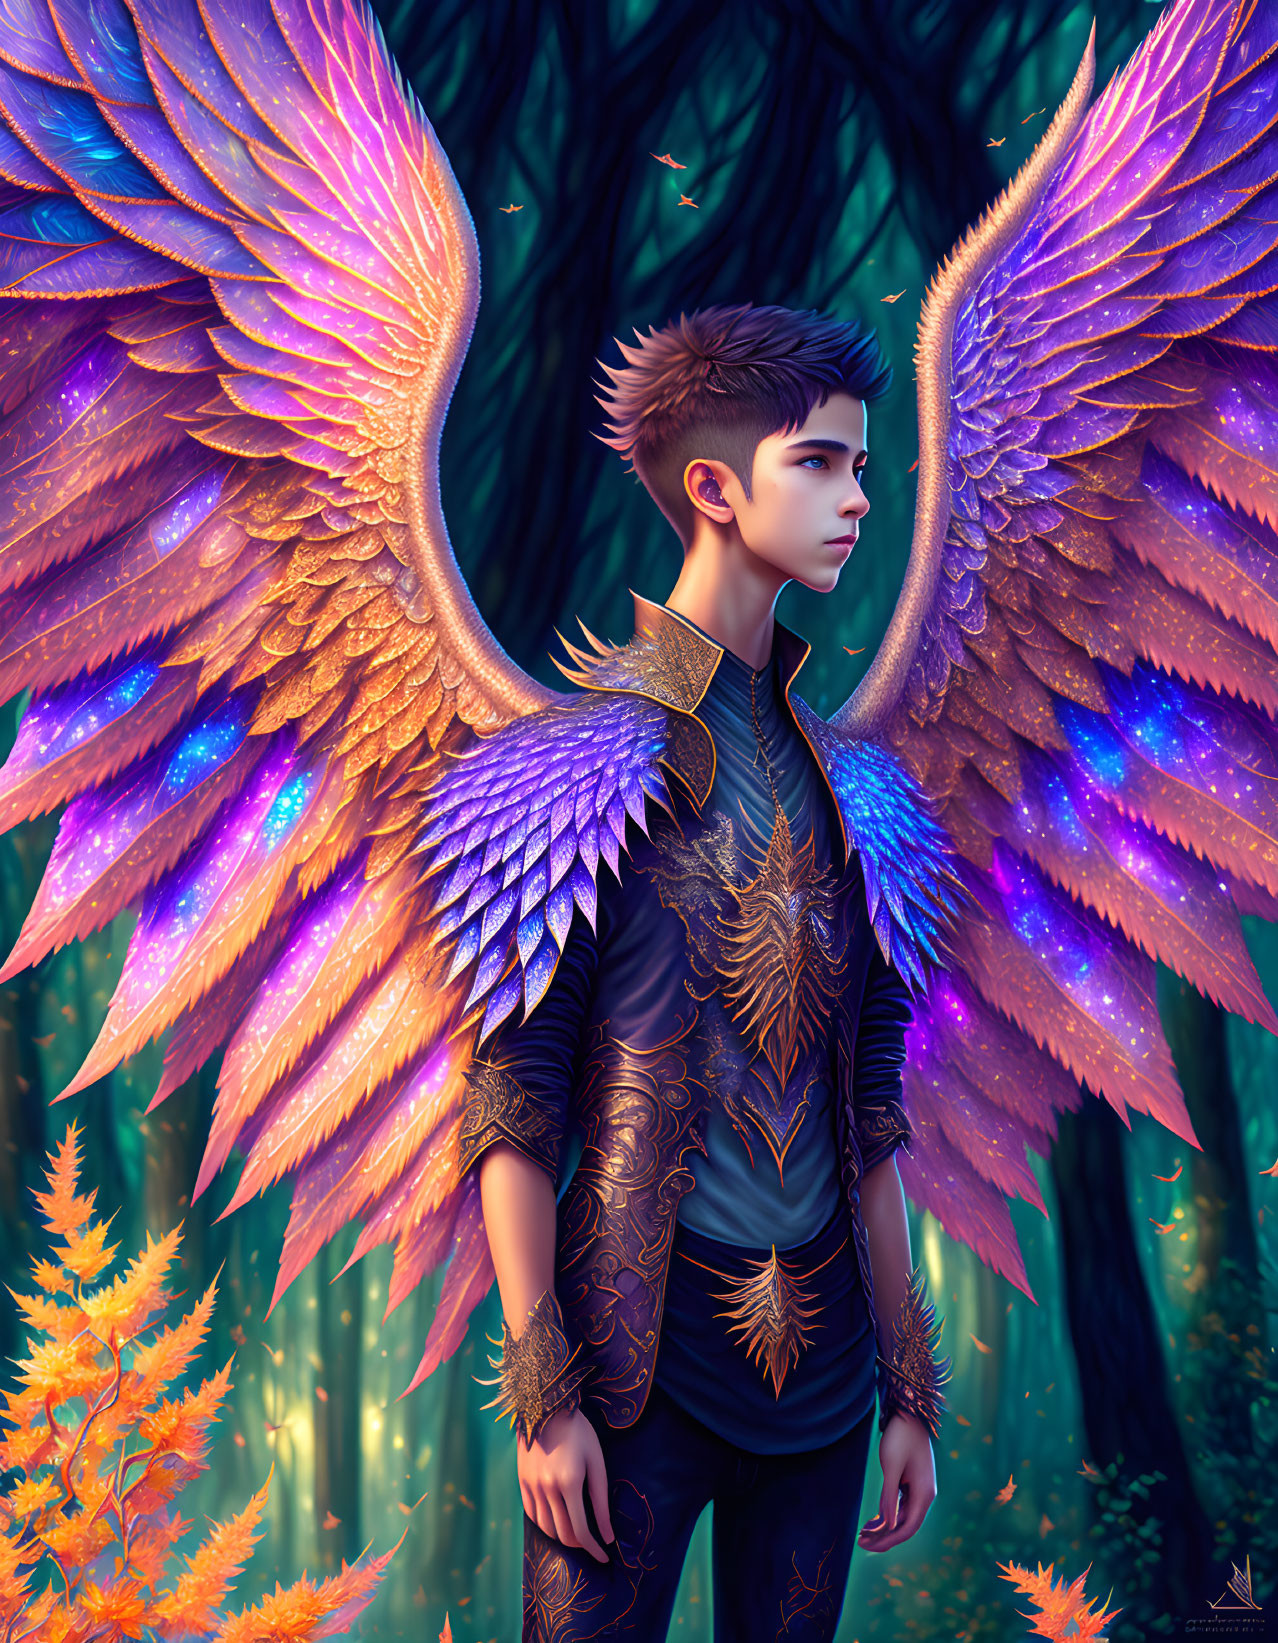 Digital artwork featuring person with luminous feathered wings in forest wearing ornate armor.